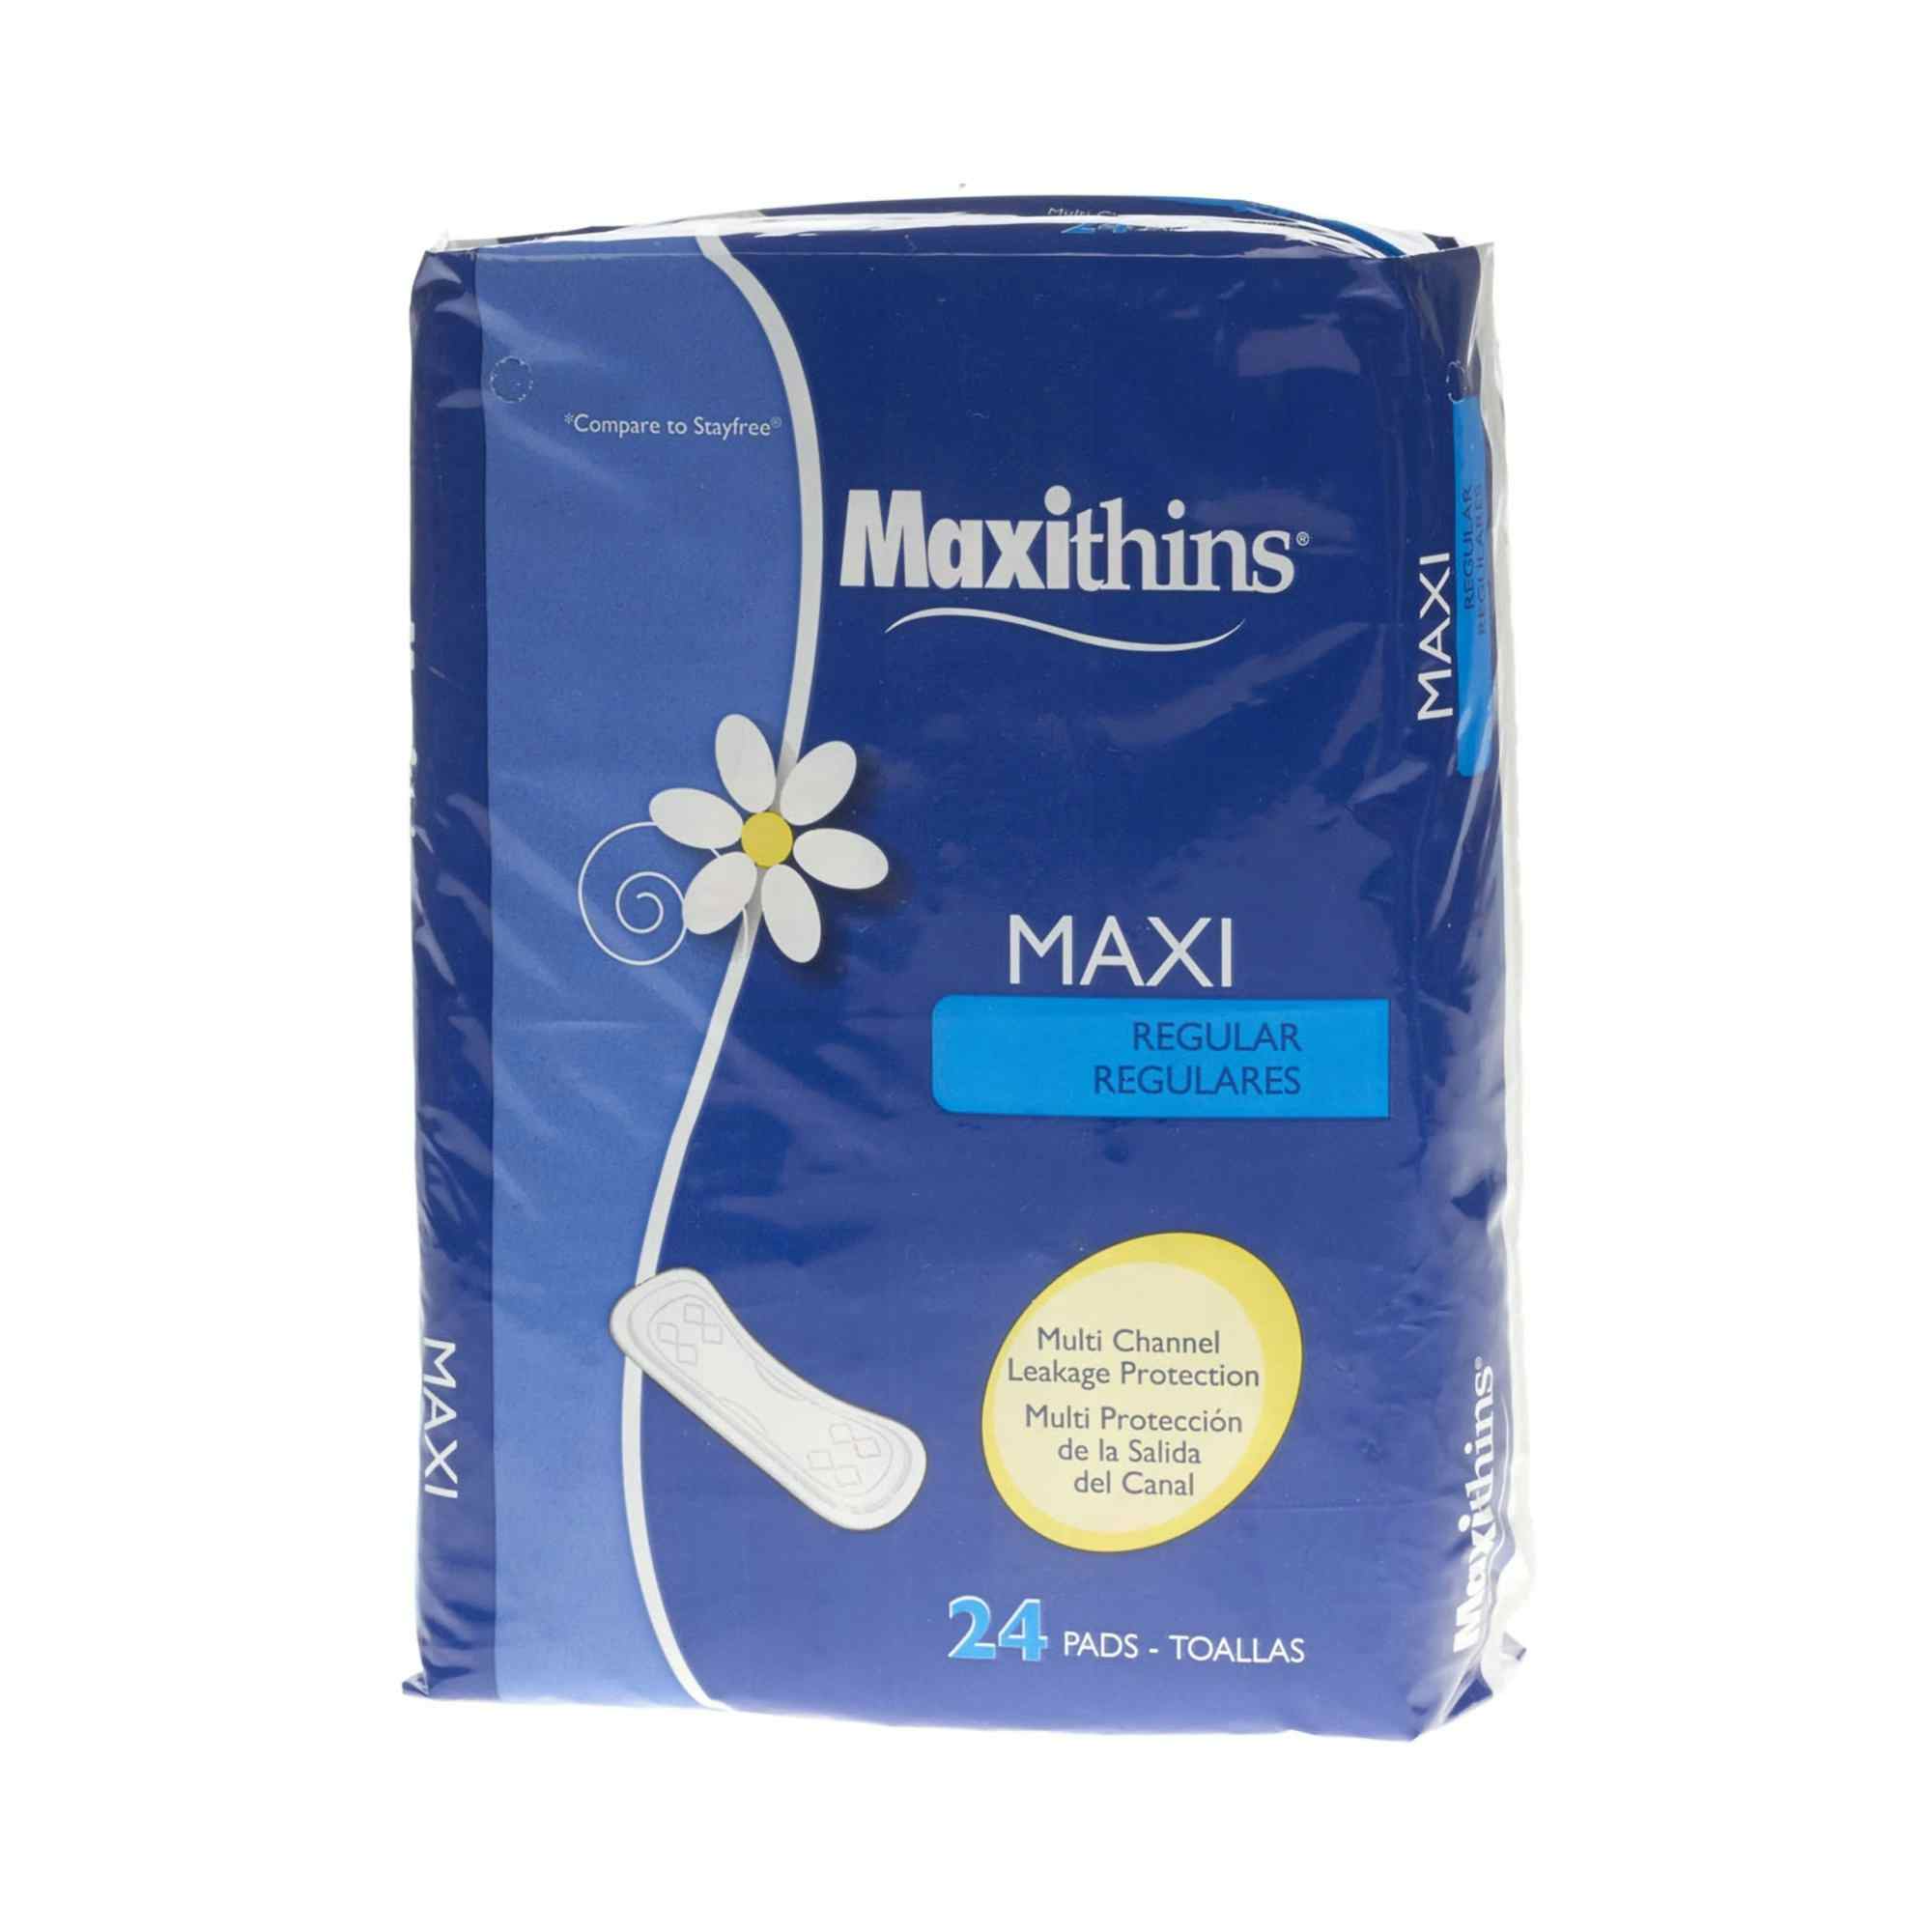 Maxithins Maxi Pads, Regular Absorbency, MT48044, Case of 288 (12 Bags)